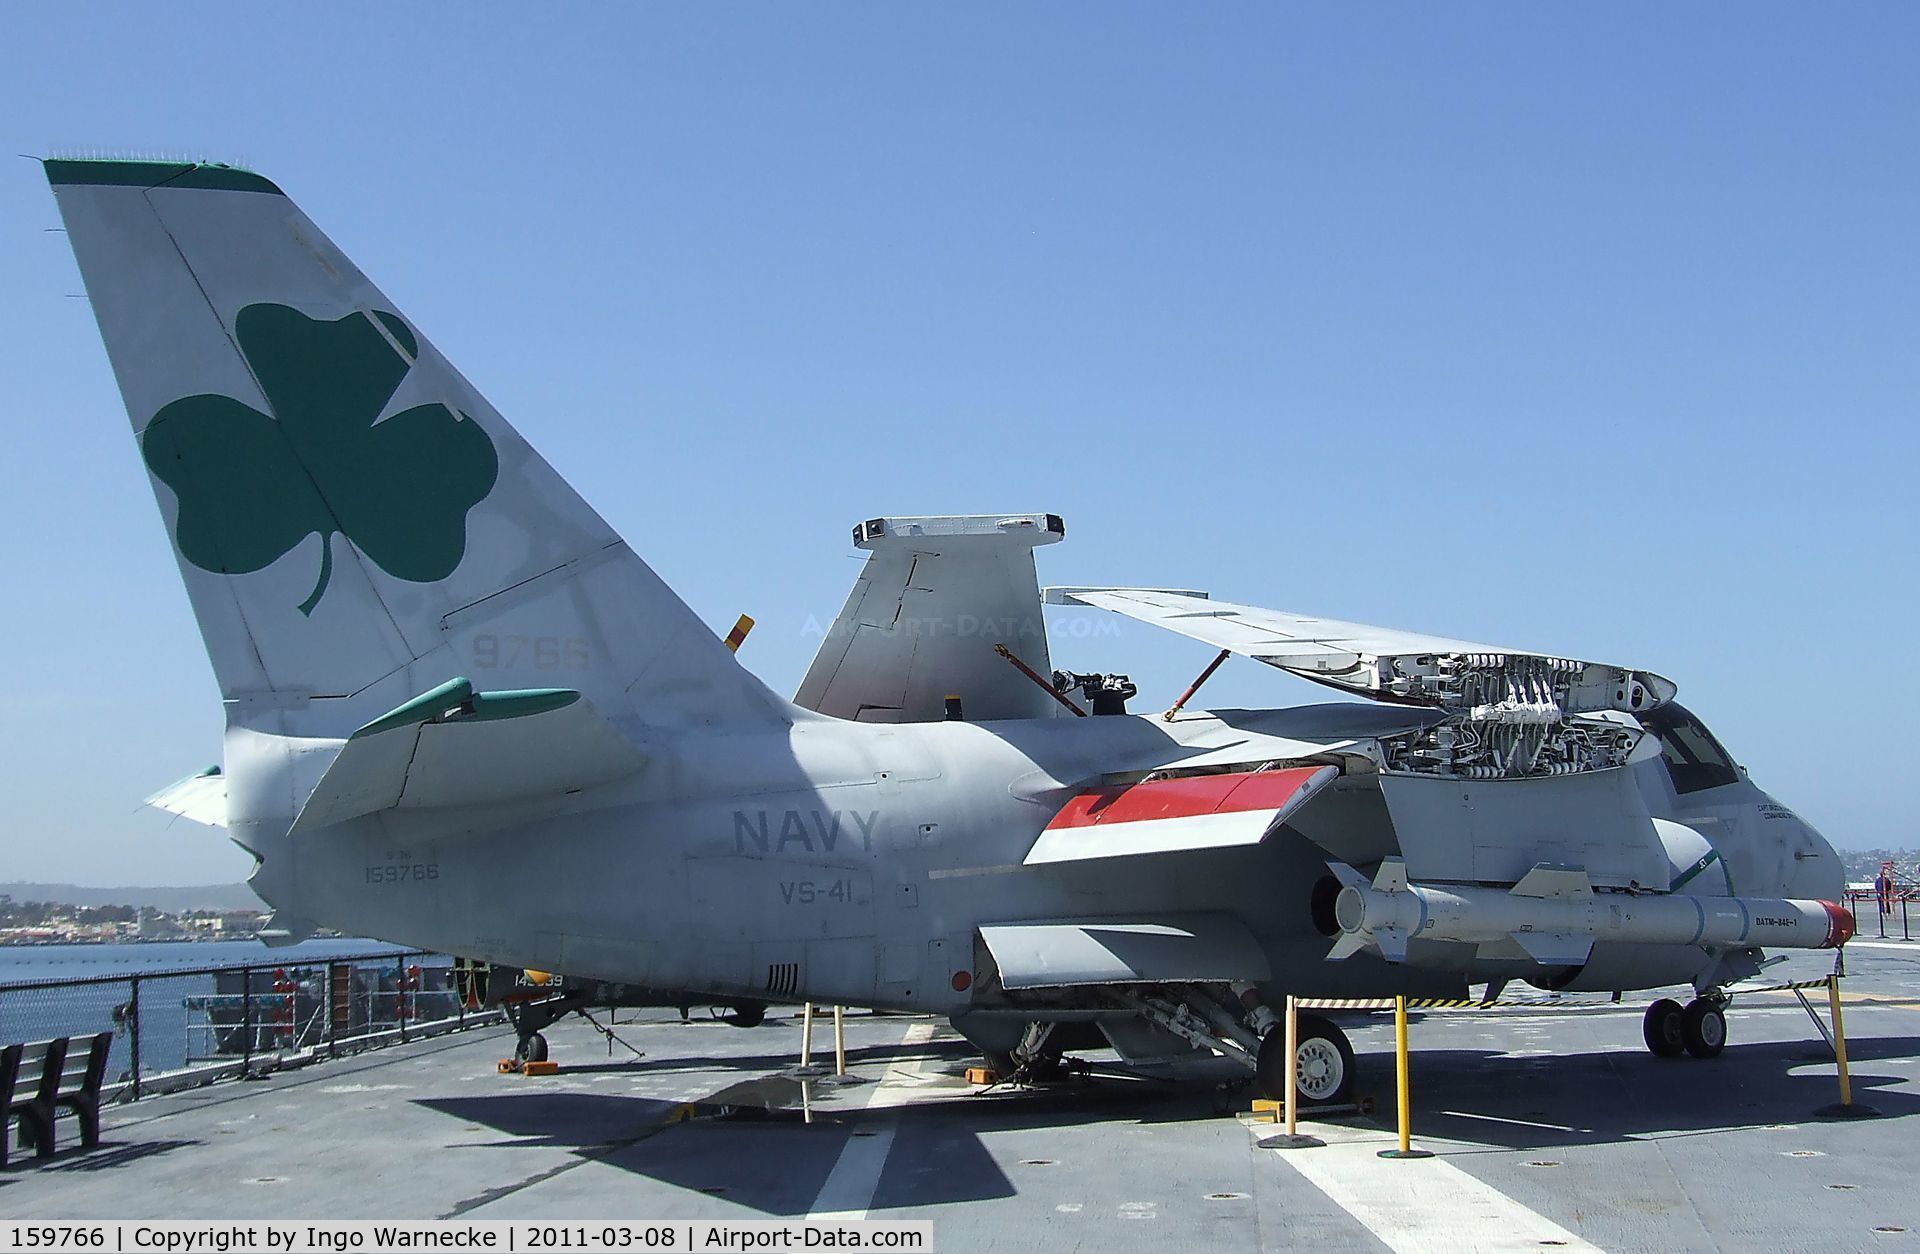 159766, Lockheed S-3A Viking C/N 394A-1095, Lockheed S-3A Viking on the flight deck of the USS Midway Museum, San Diego CA